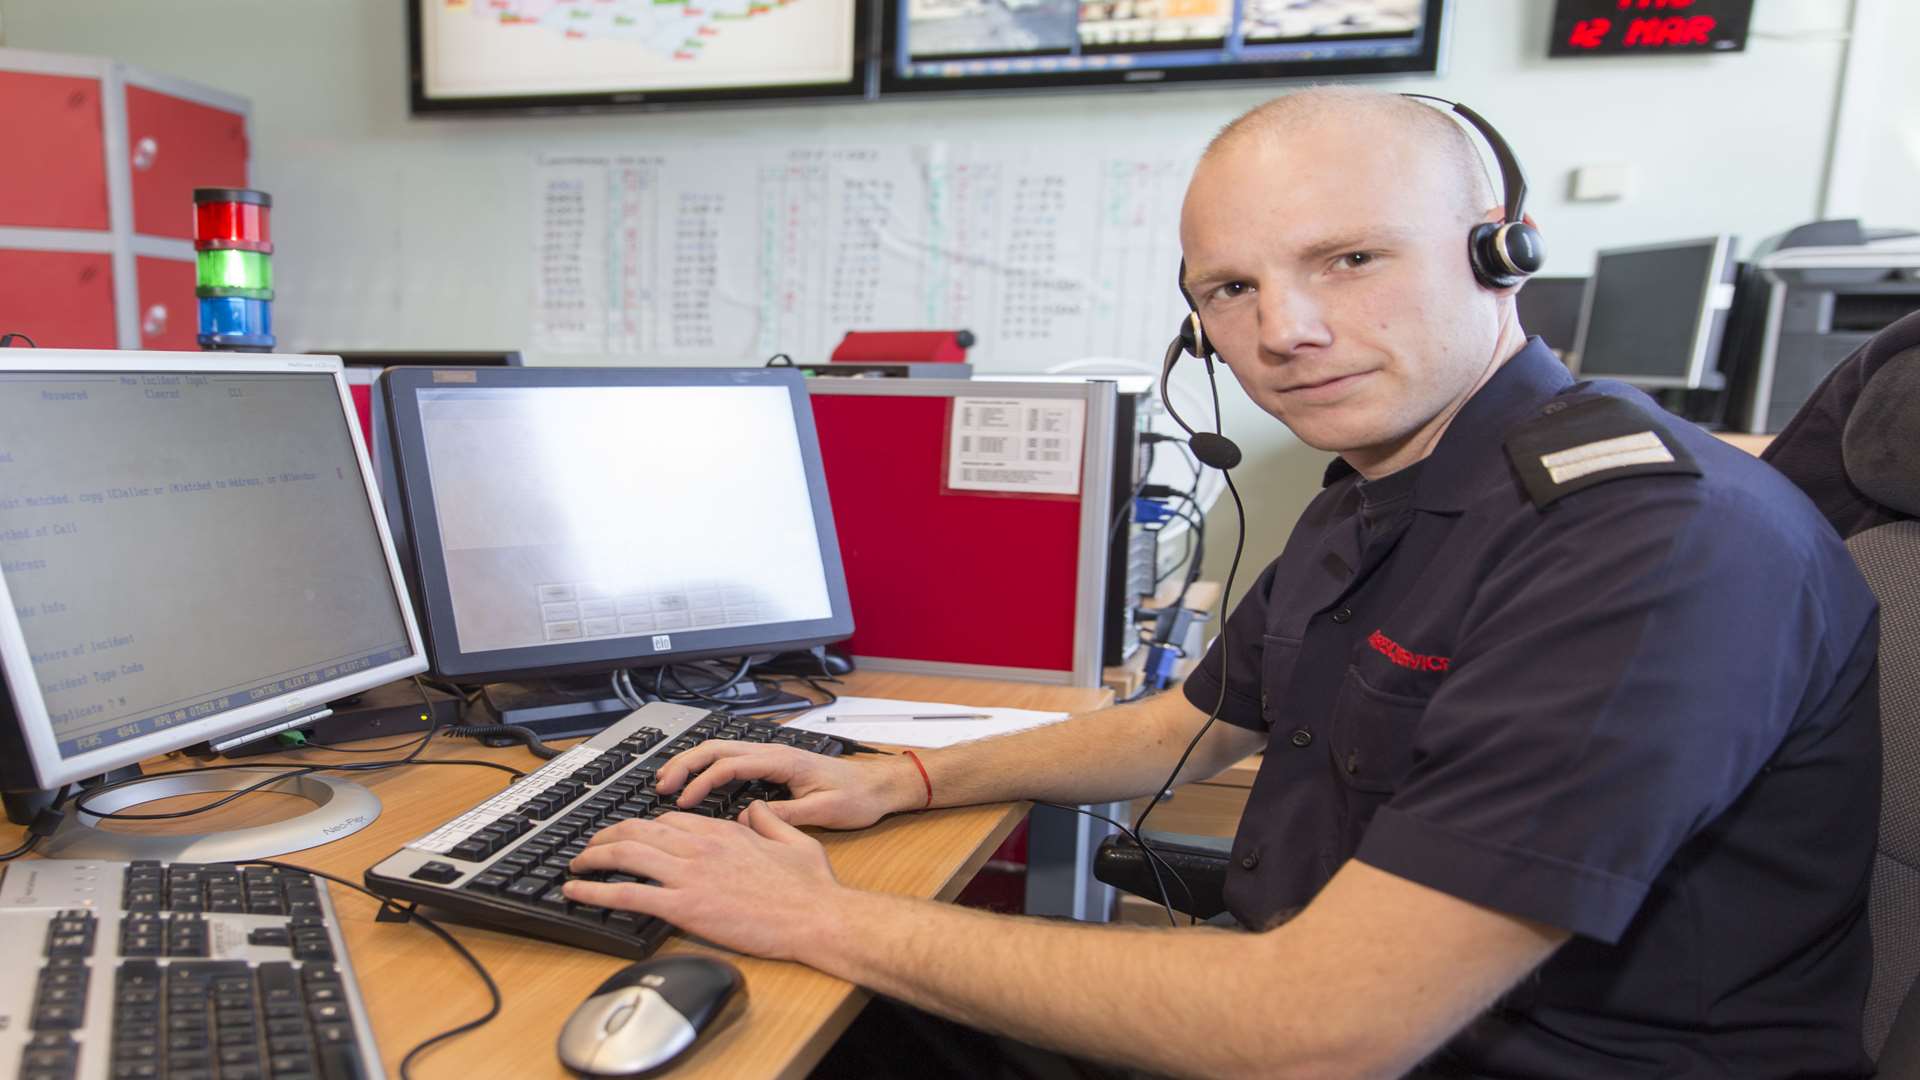 Firefighter and control room manager Sam Sellick